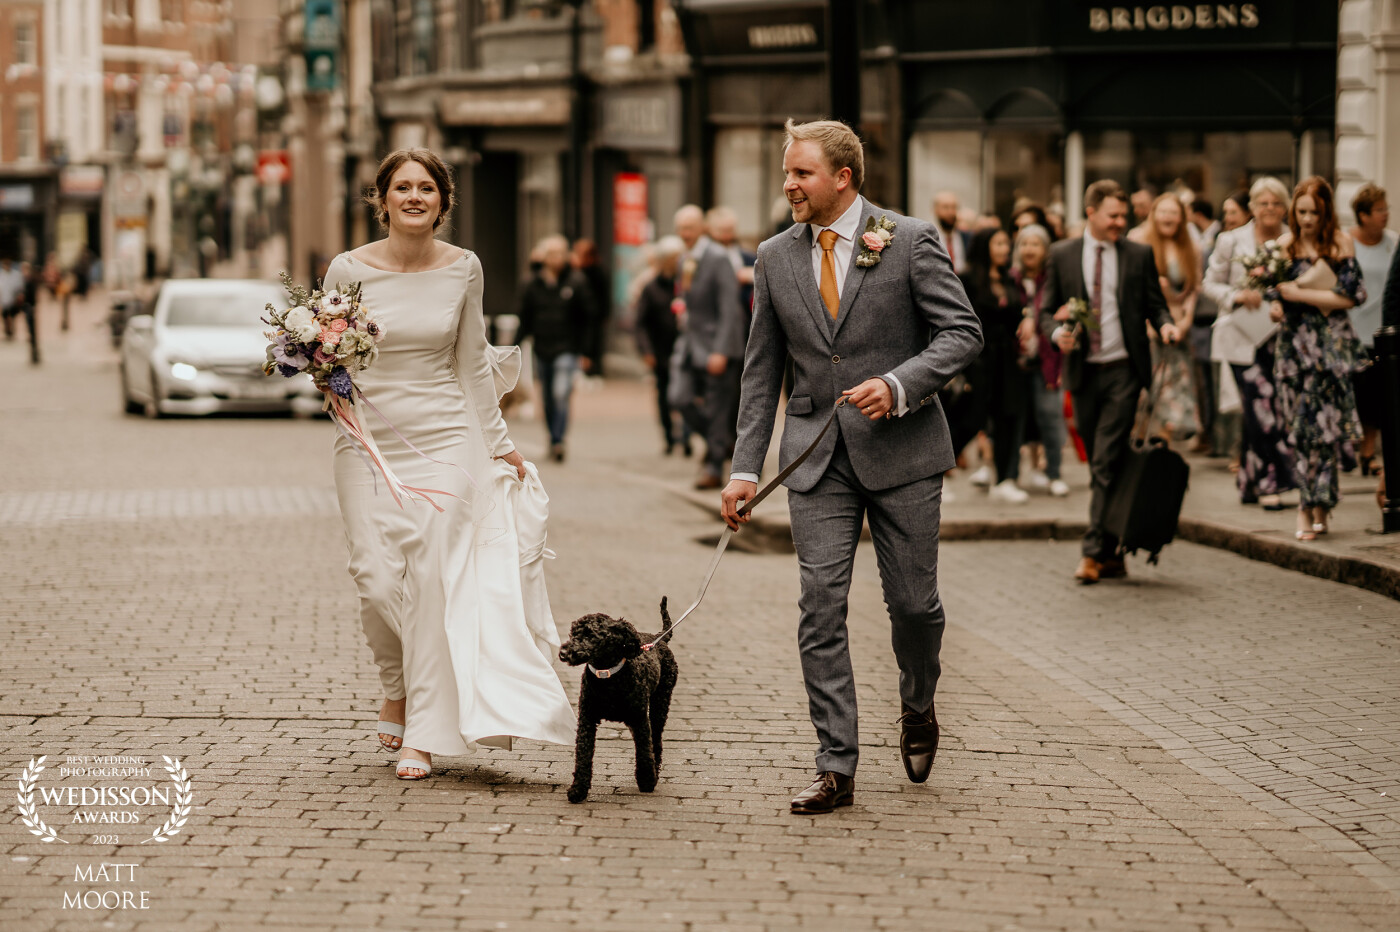 Urban weddings are just so cool. Having an extended gallery of people clapping and wowing you just gives you celebrity status. Orianne and Kristian smashed it with their walk through a busy Derby city centre